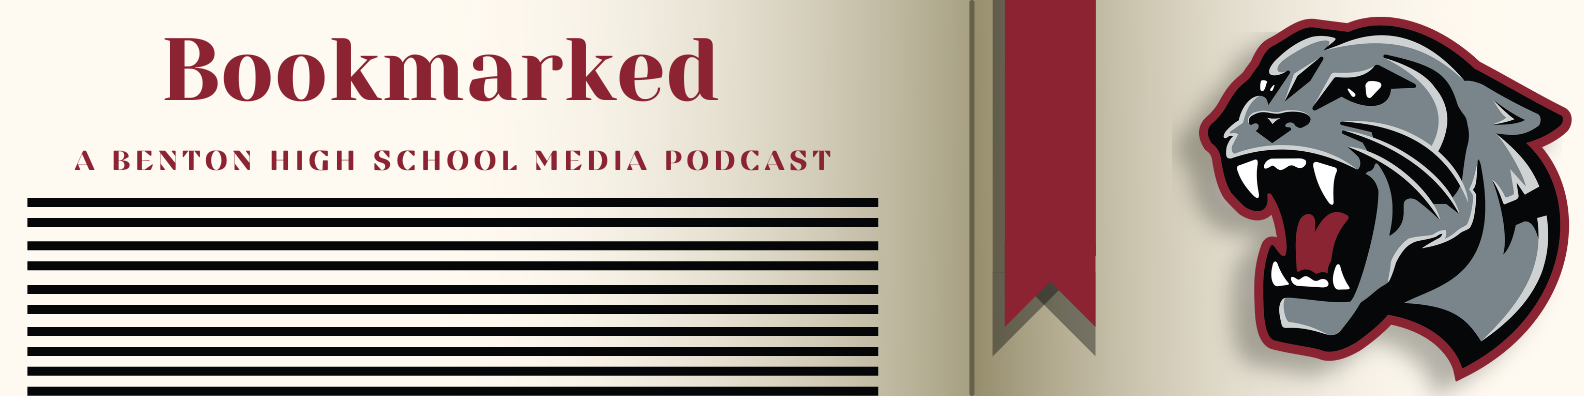 Bookmarked Podcast